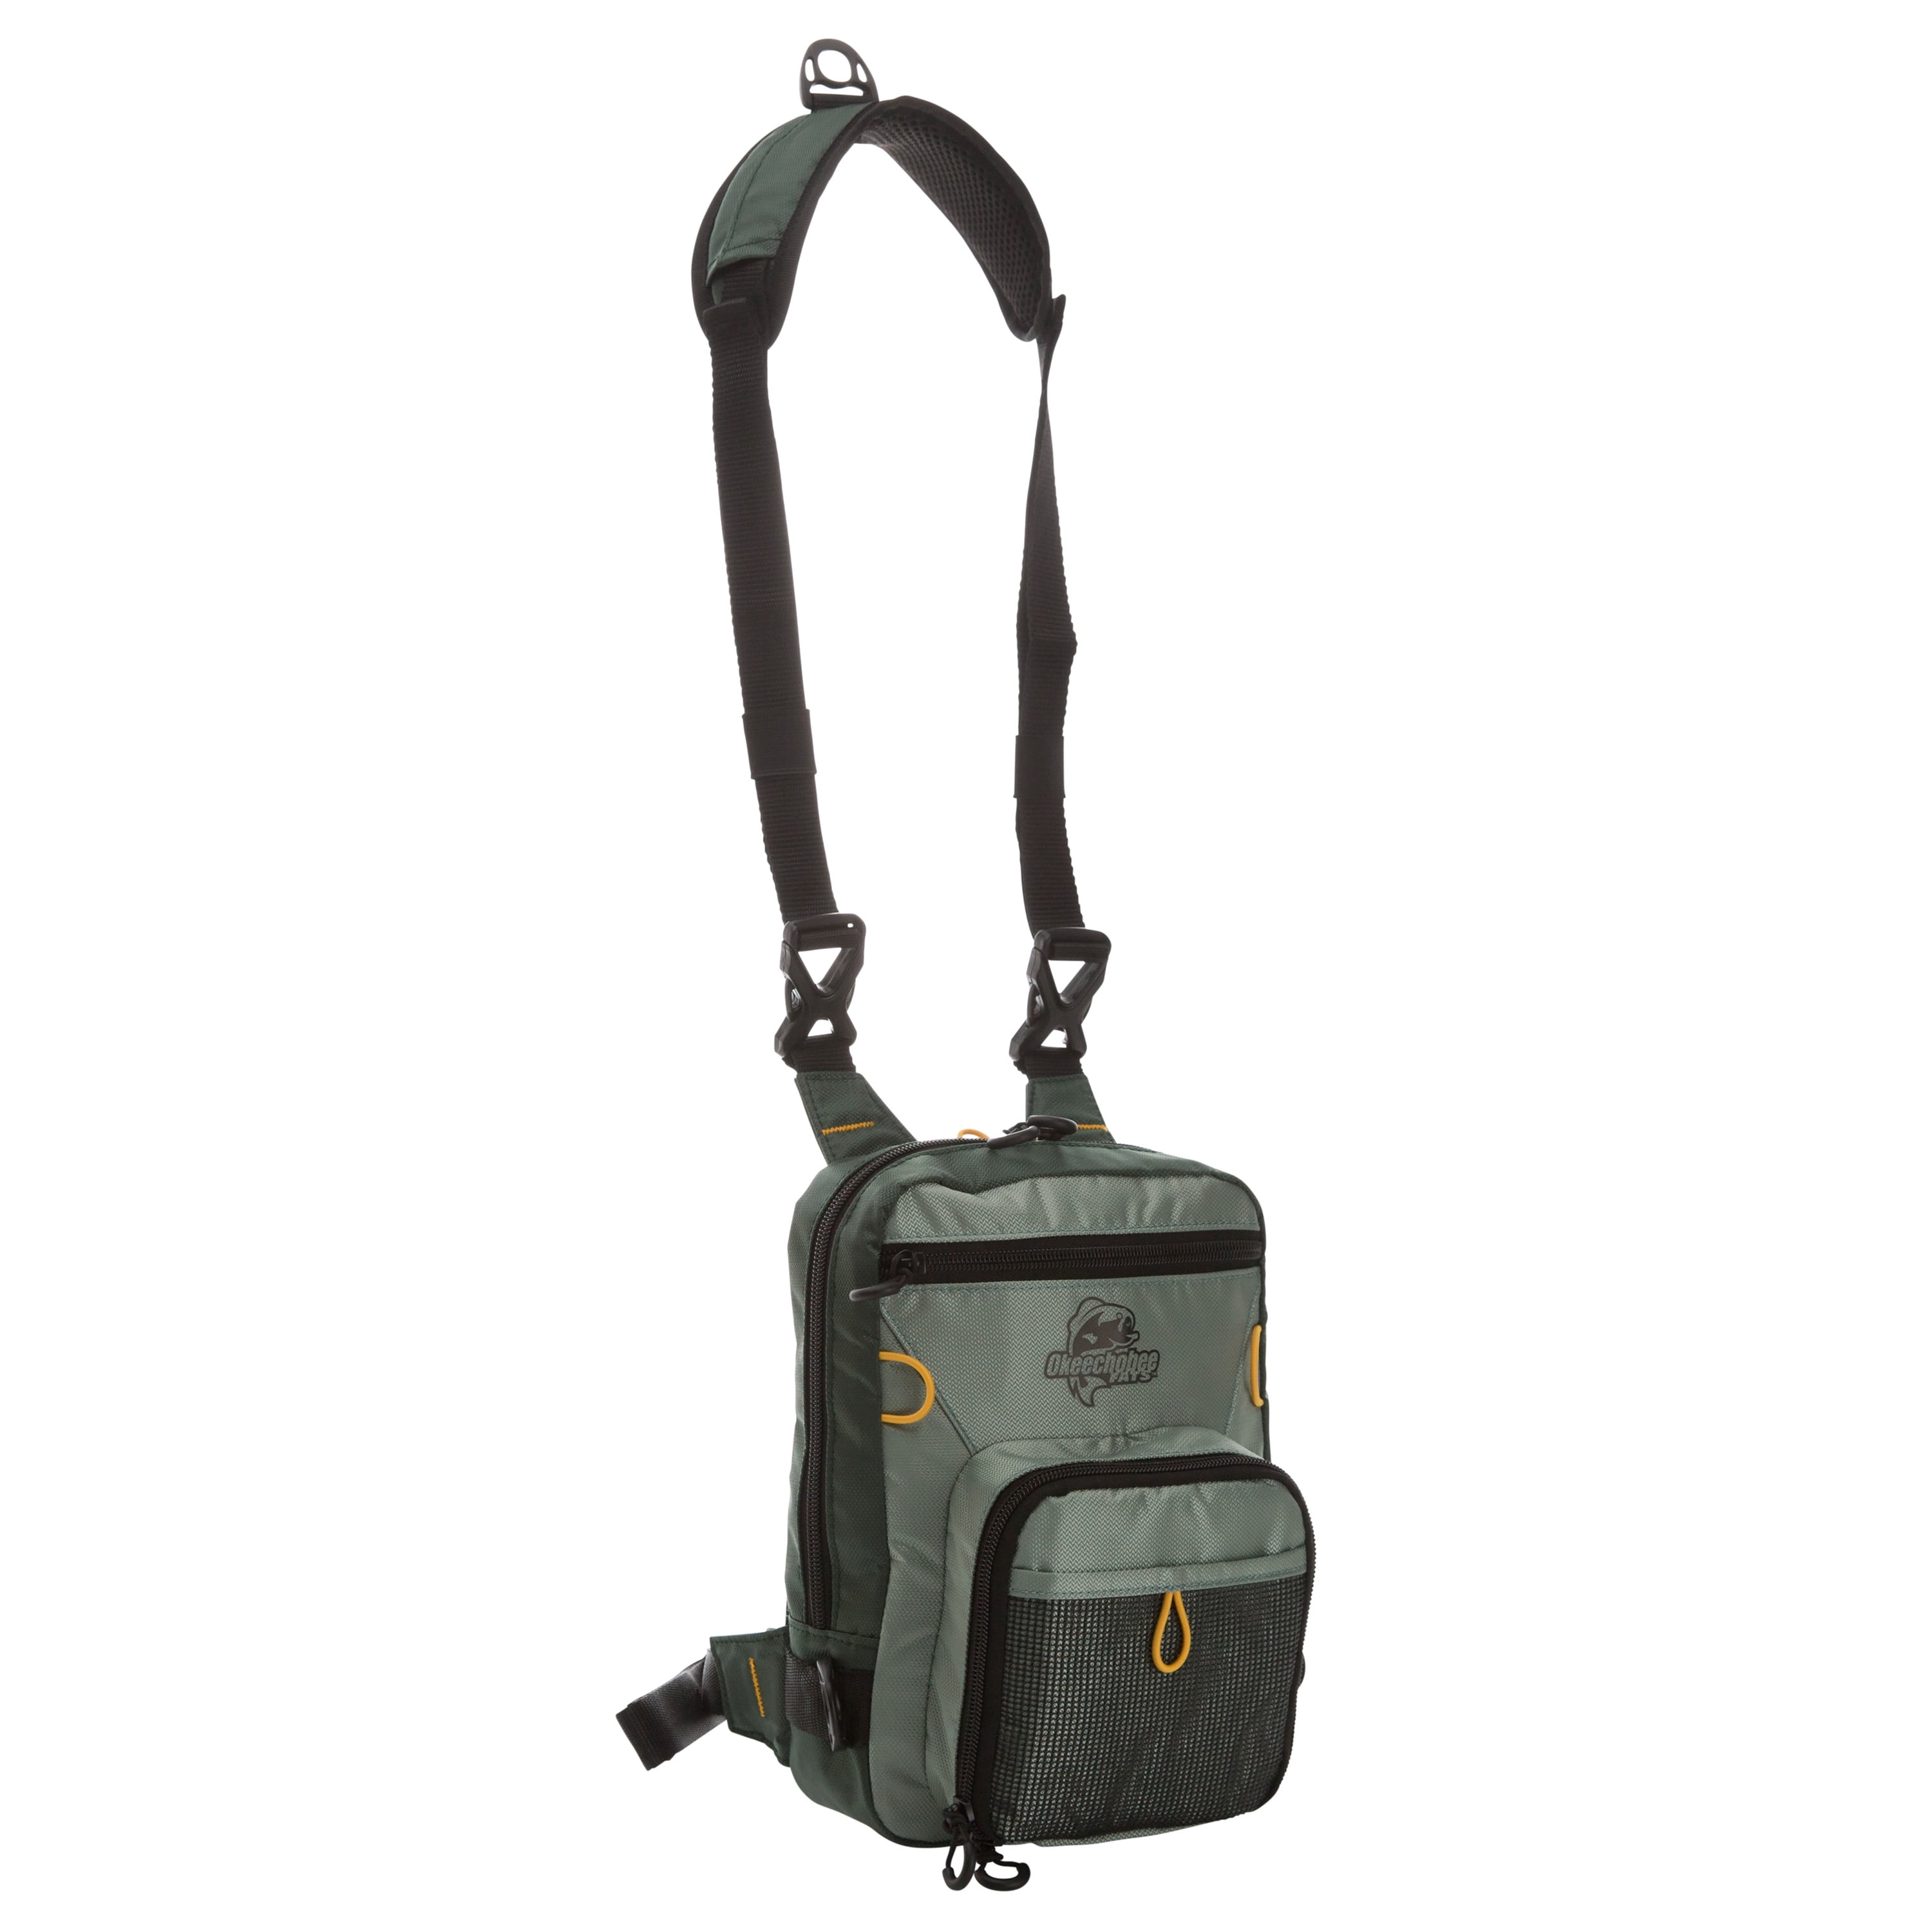 Okeechobee Fats Fly Fishing Tackle Bag Chest Pack, Small Soft-Sided, Sagebrush, Polyester - Sagebrush